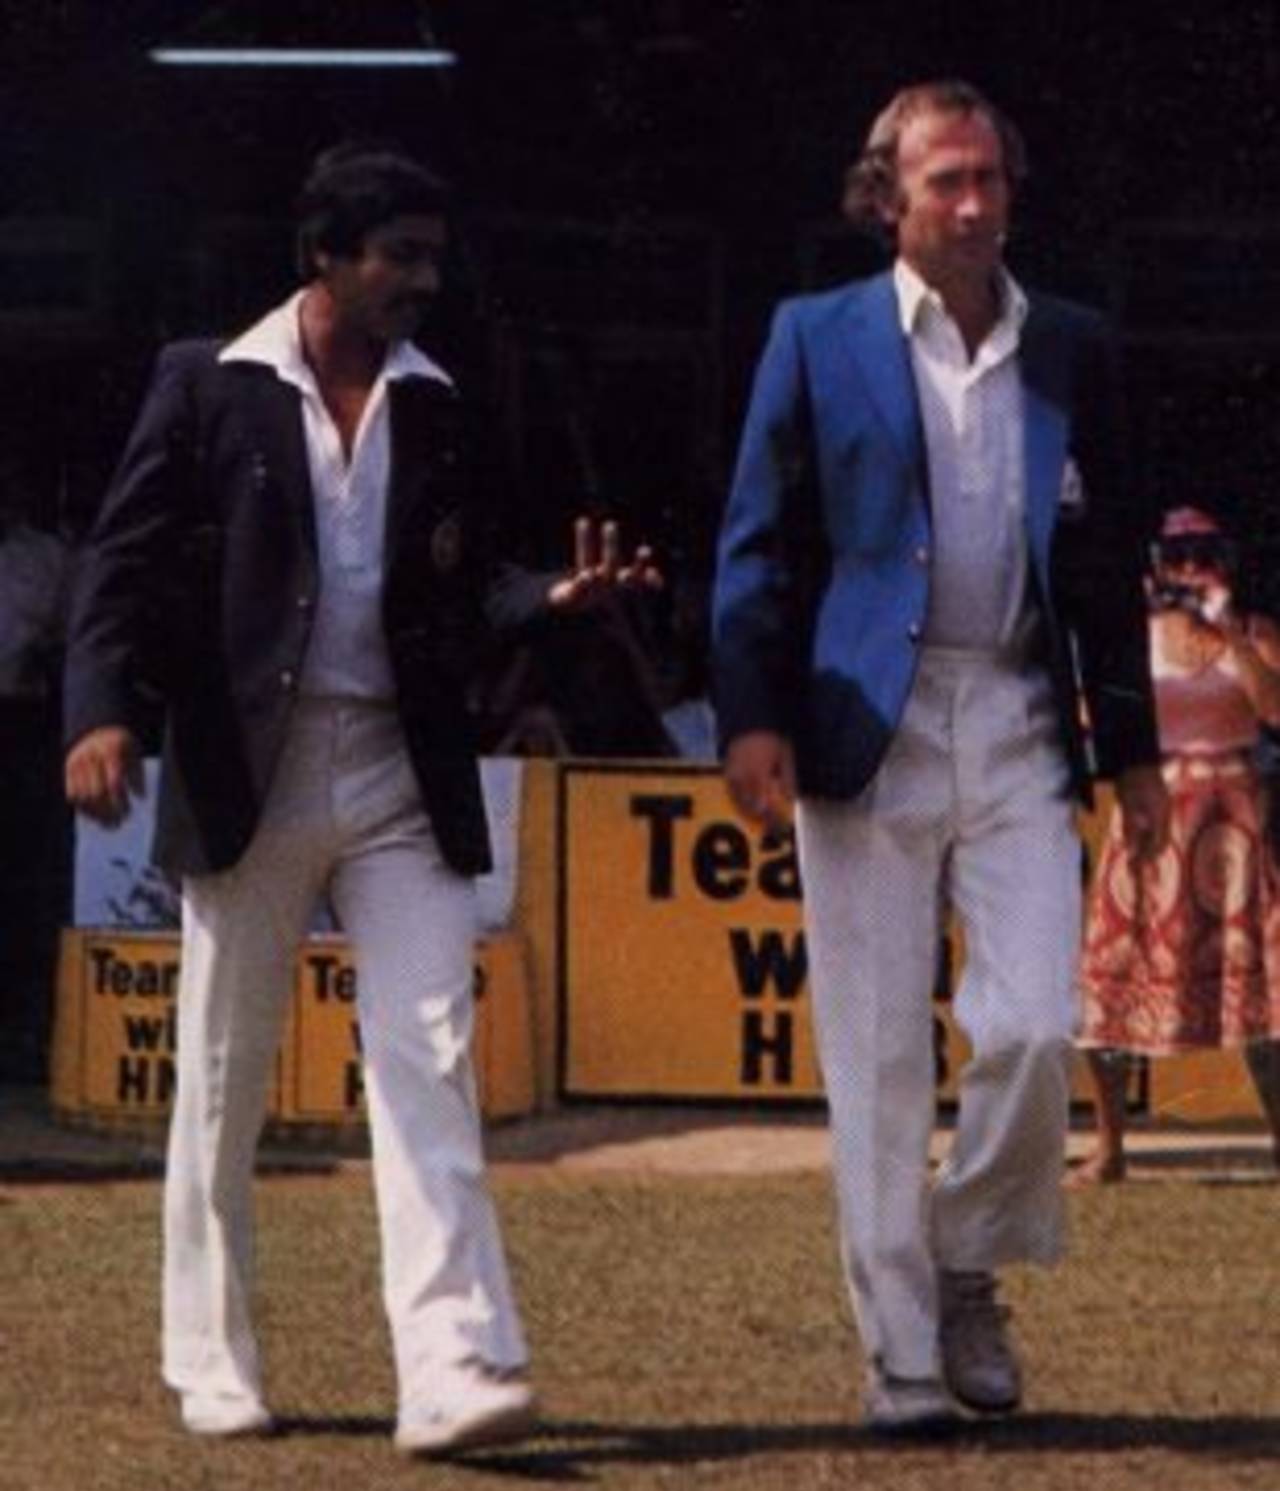 Bandula Warnapura and Keith Fletcher go out to toss ahead of Sri Lanka's first Test; by the end of the year the international careers of both men were over&nbsp;&nbsp;&bull;&nbsp;&nbsp;David Frith